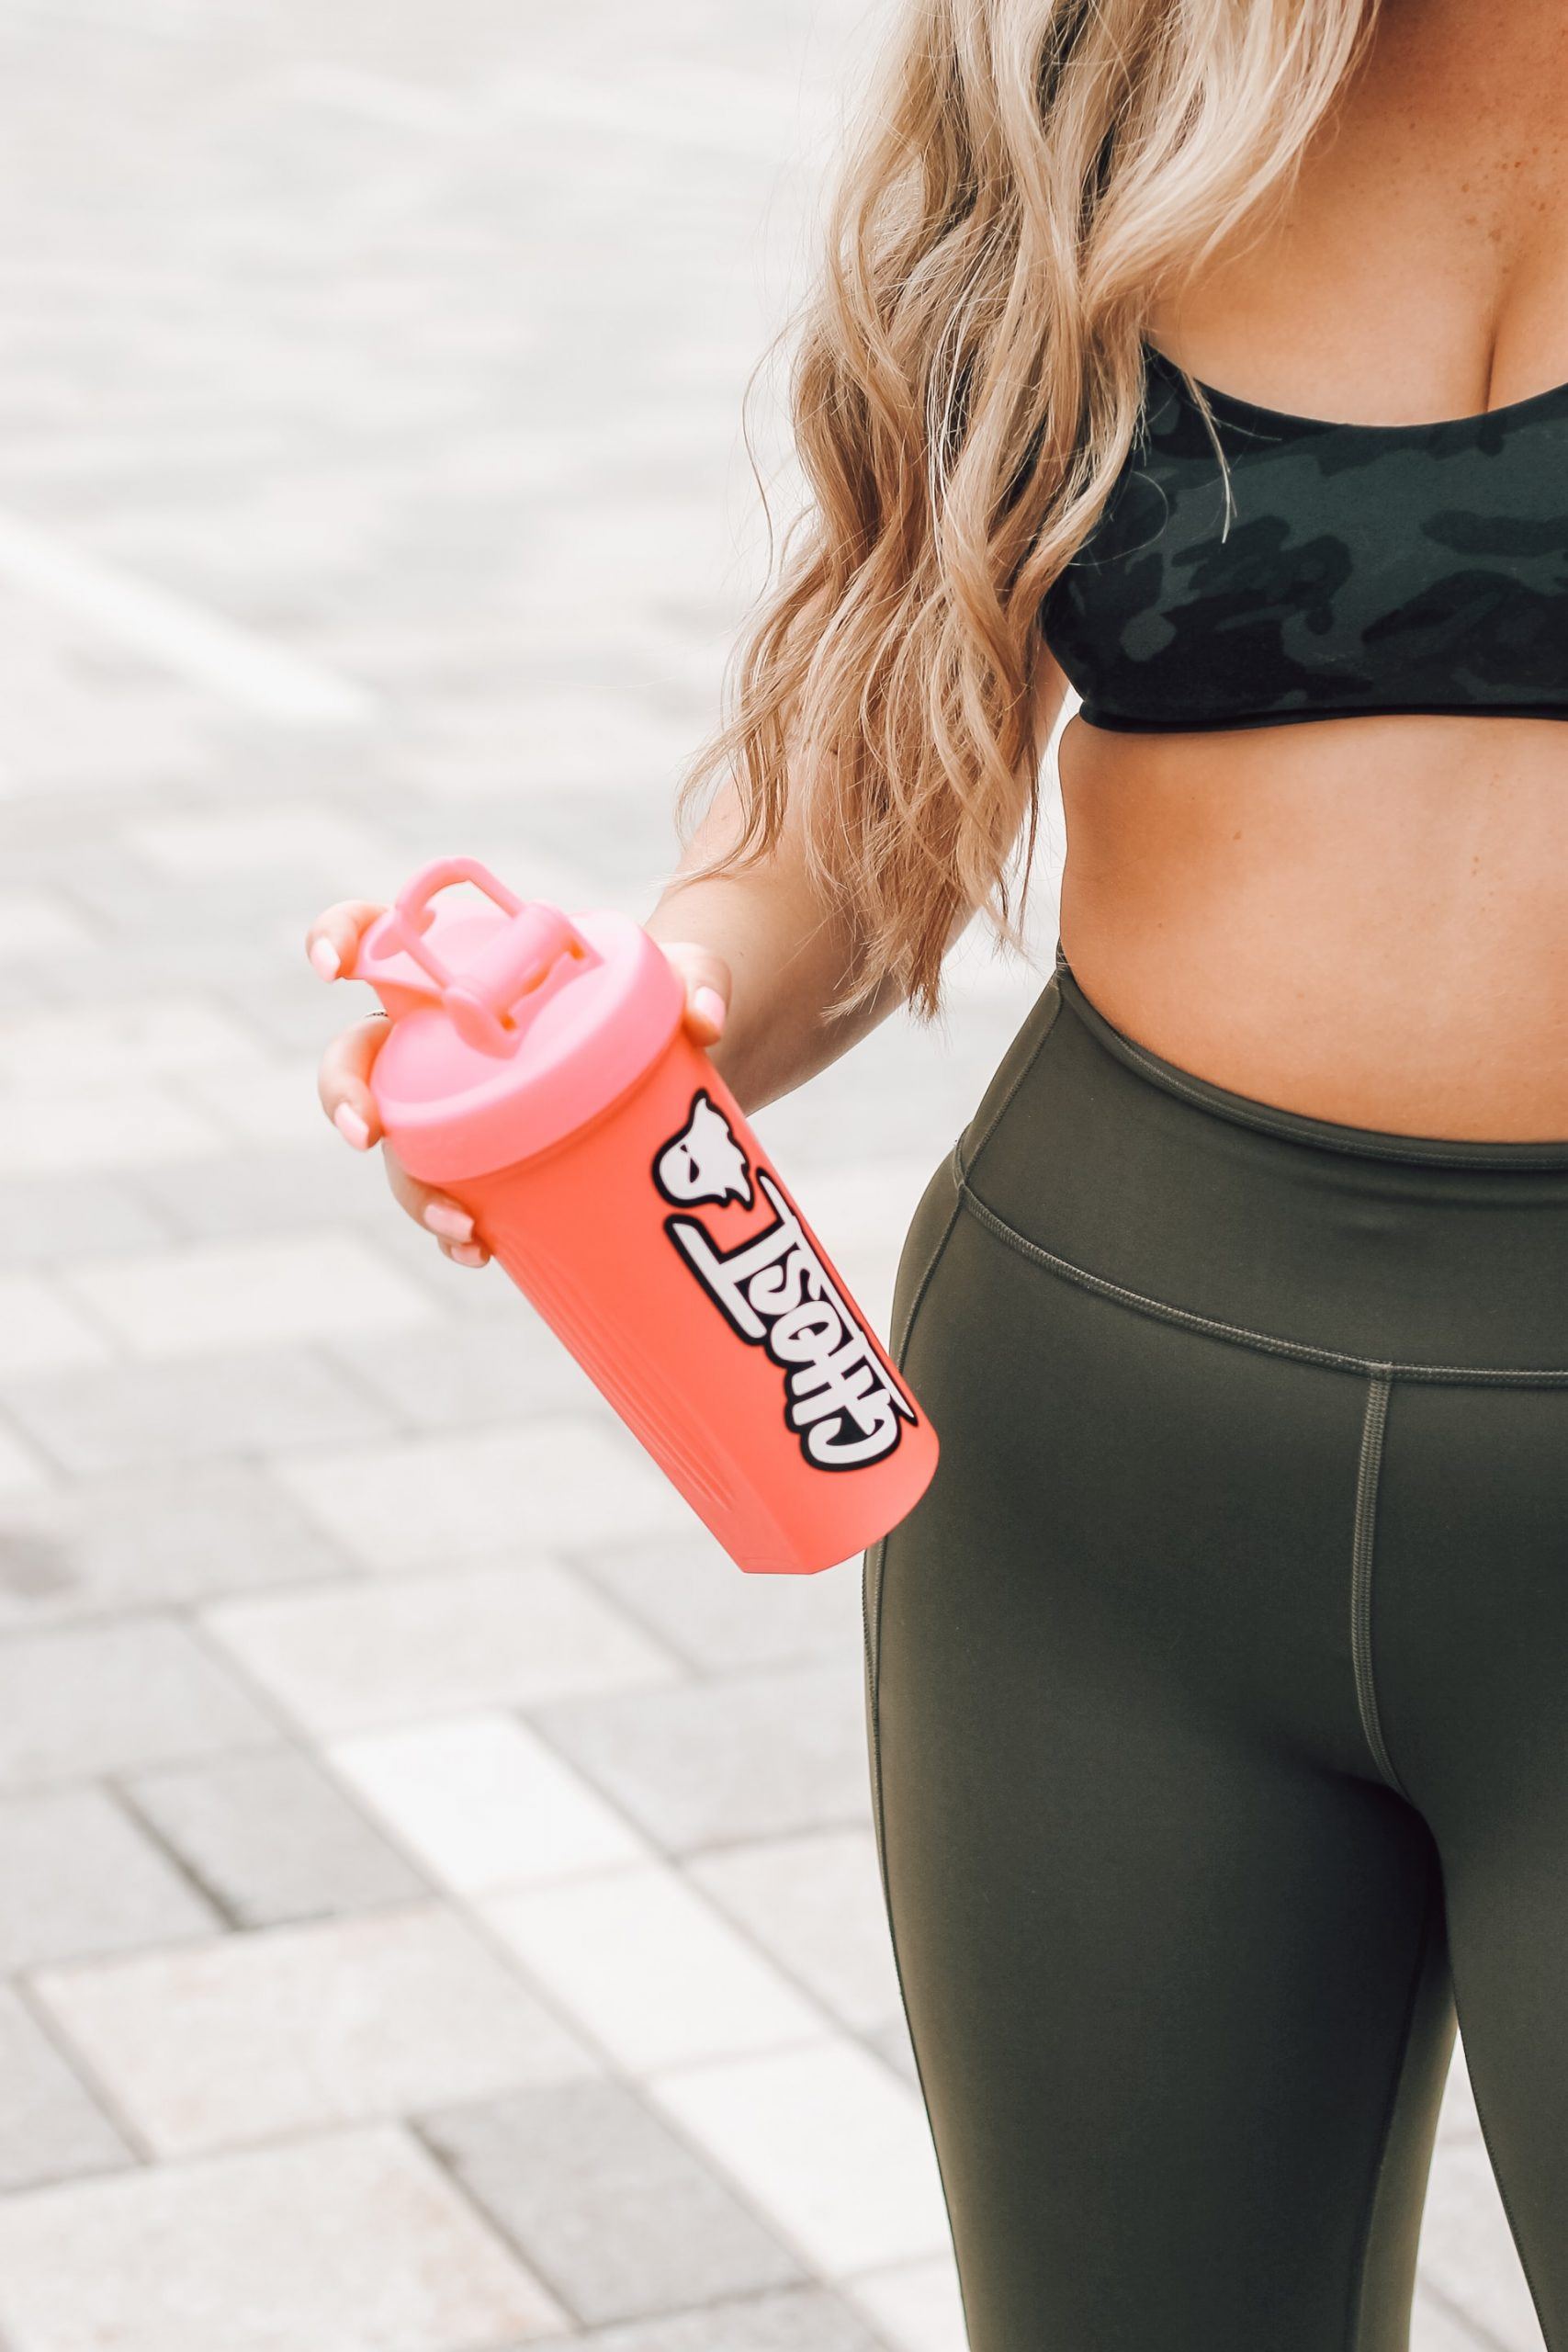 How To Choose Women’s Pre Workout Supplement?